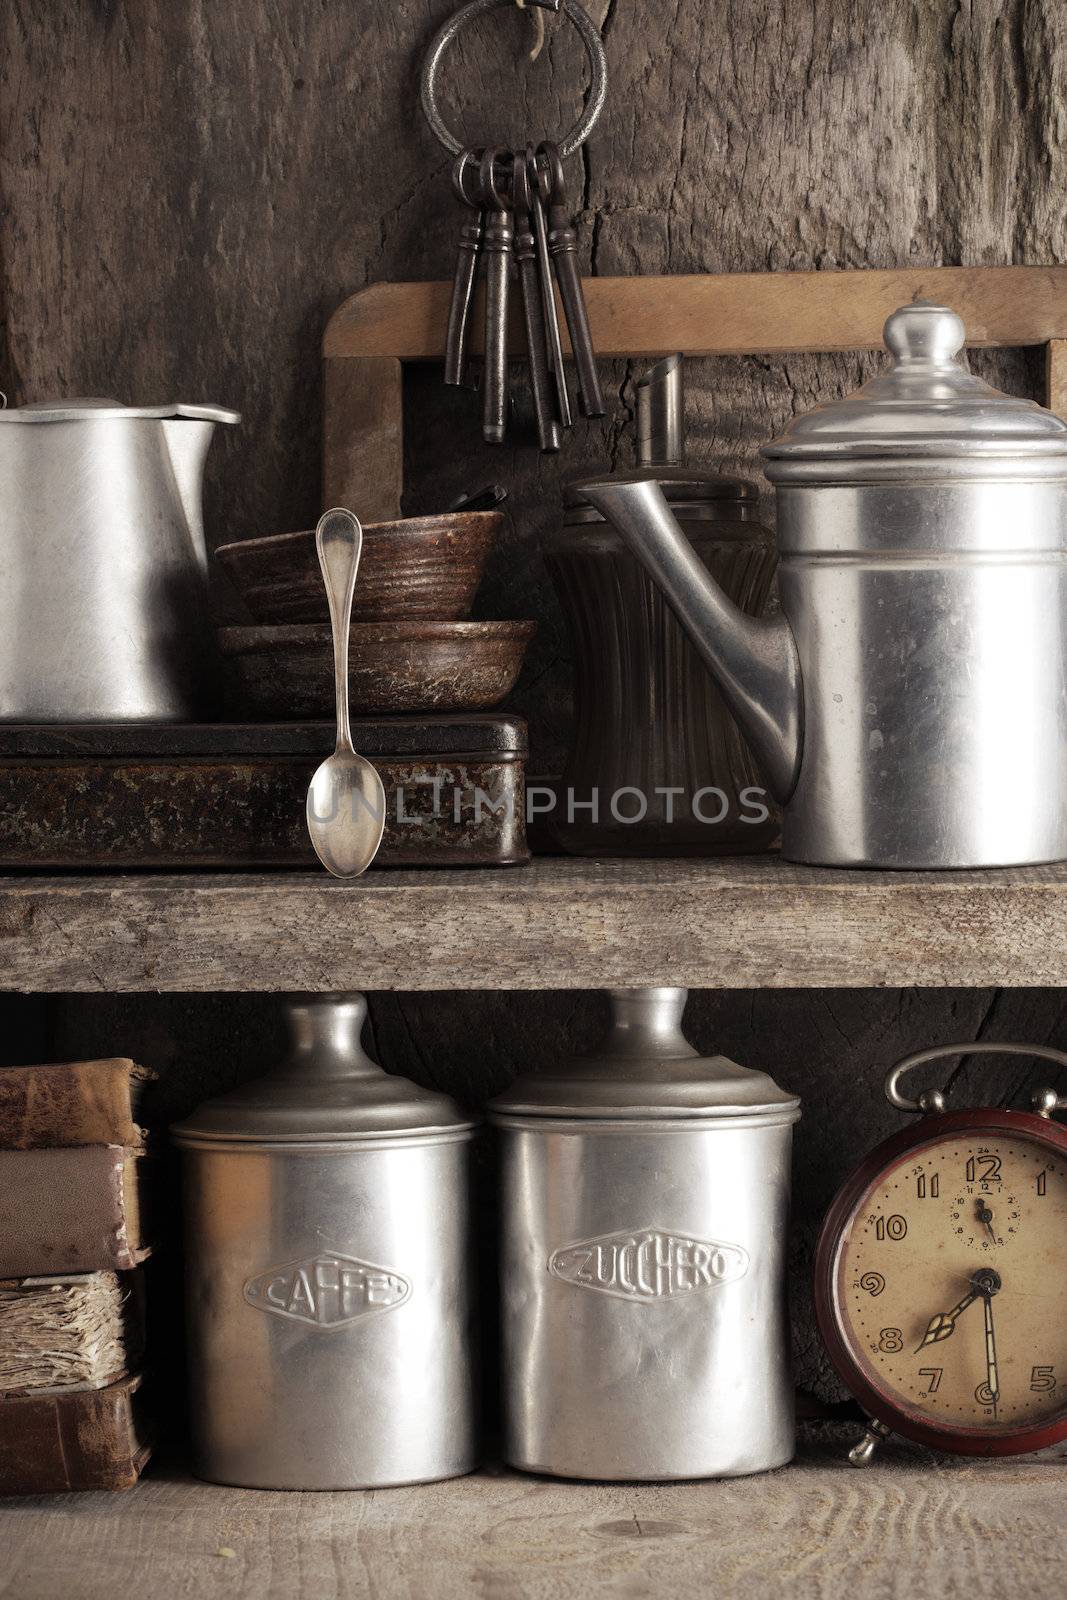 Group of antique objects on an old wood